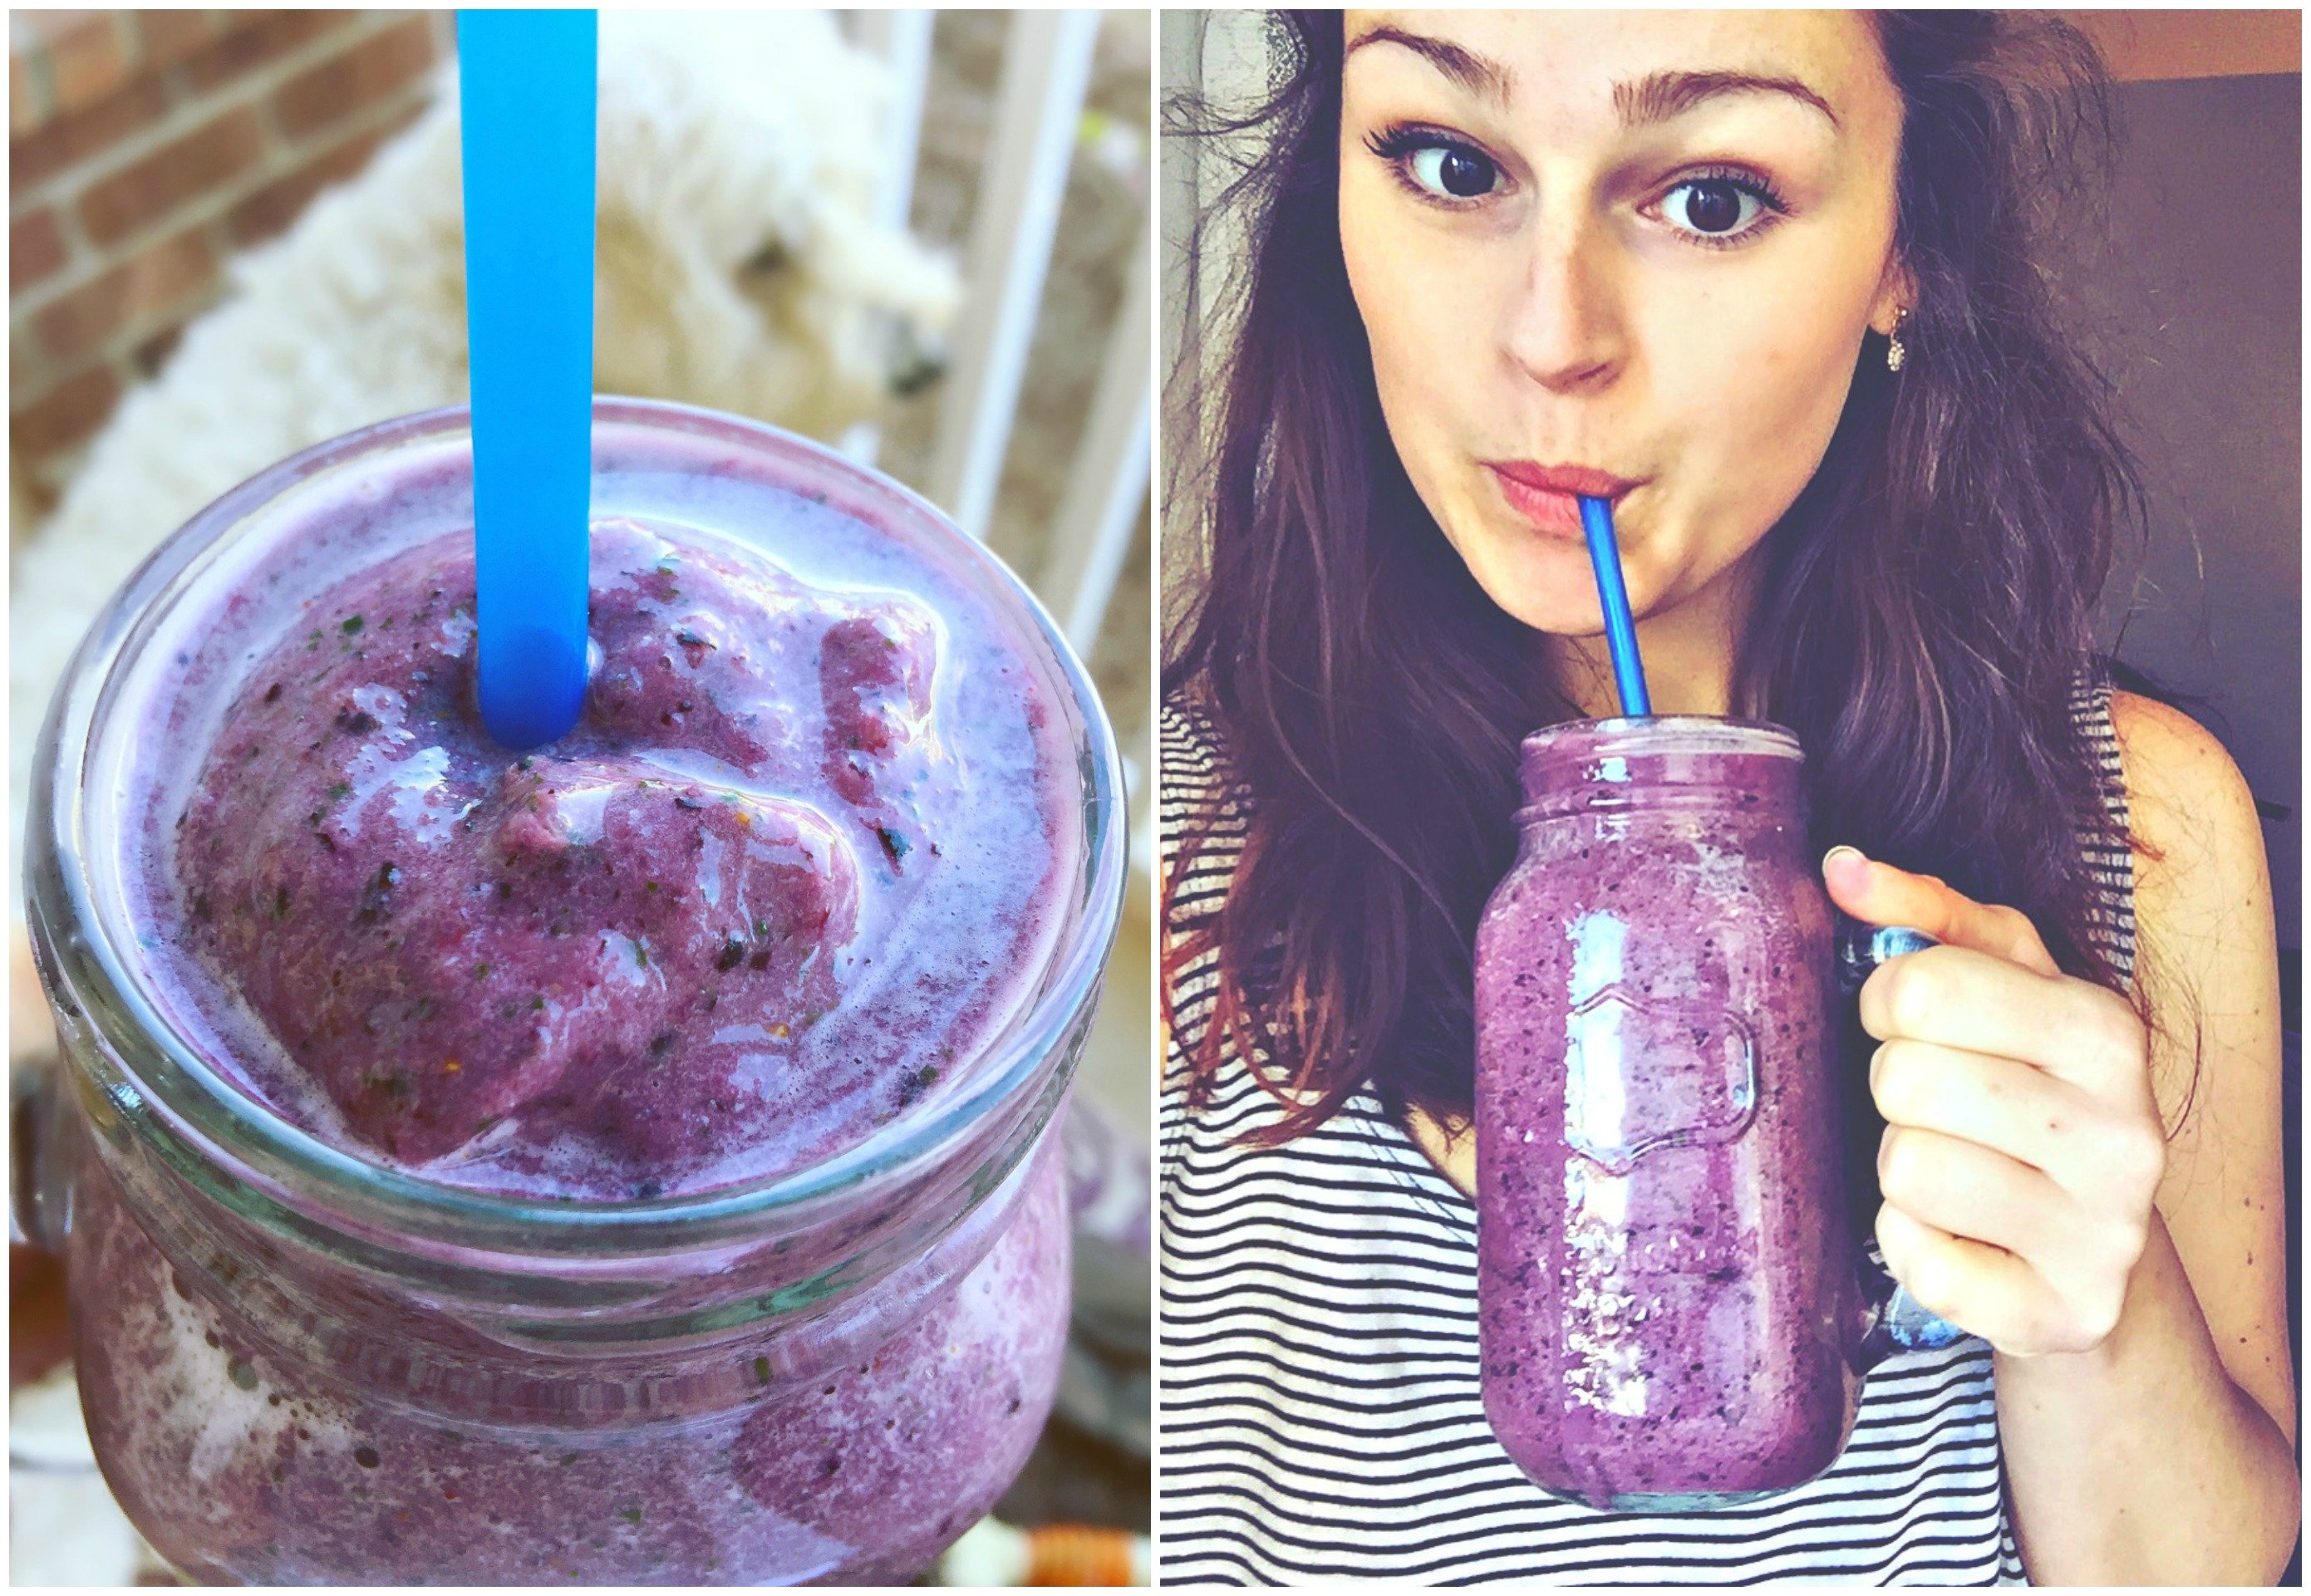 My smoothie was made with frozen blueberries, banana, peaches, almond milk, spinach, kale & Plant-Based Vanilla Protein Powder!